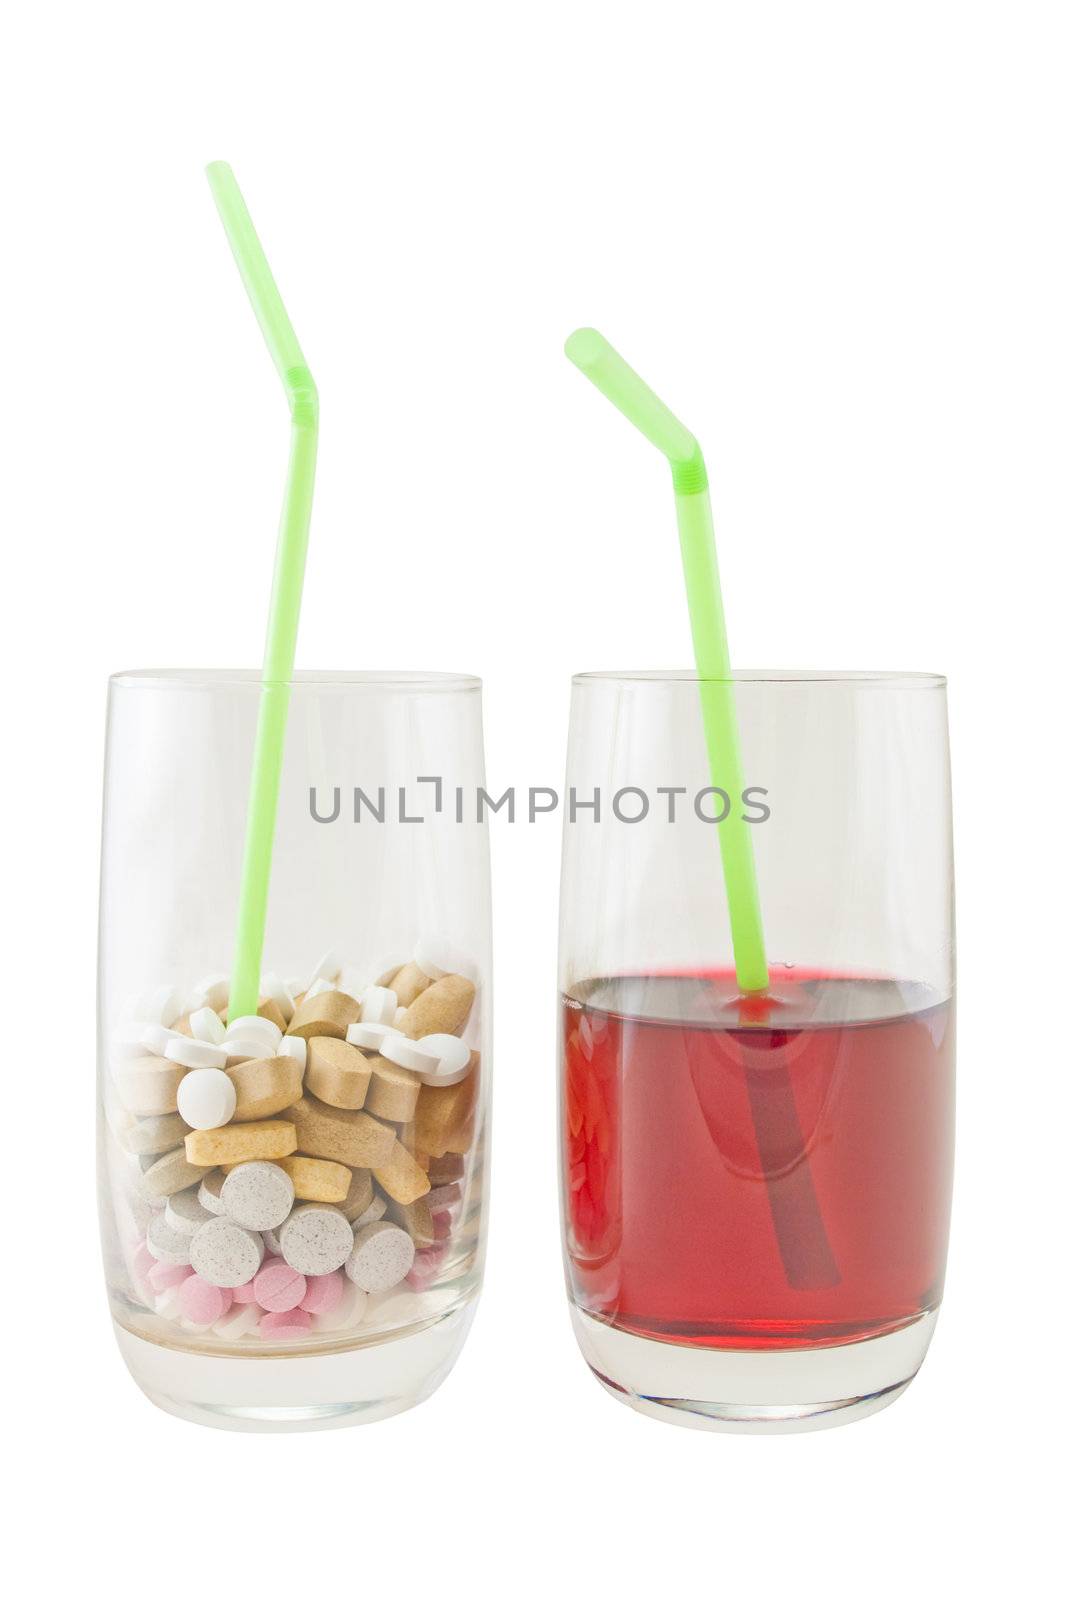 A glass of varied vitamin pills containing a green straw, next to a glass of red berry juice. Isolated against a white background.